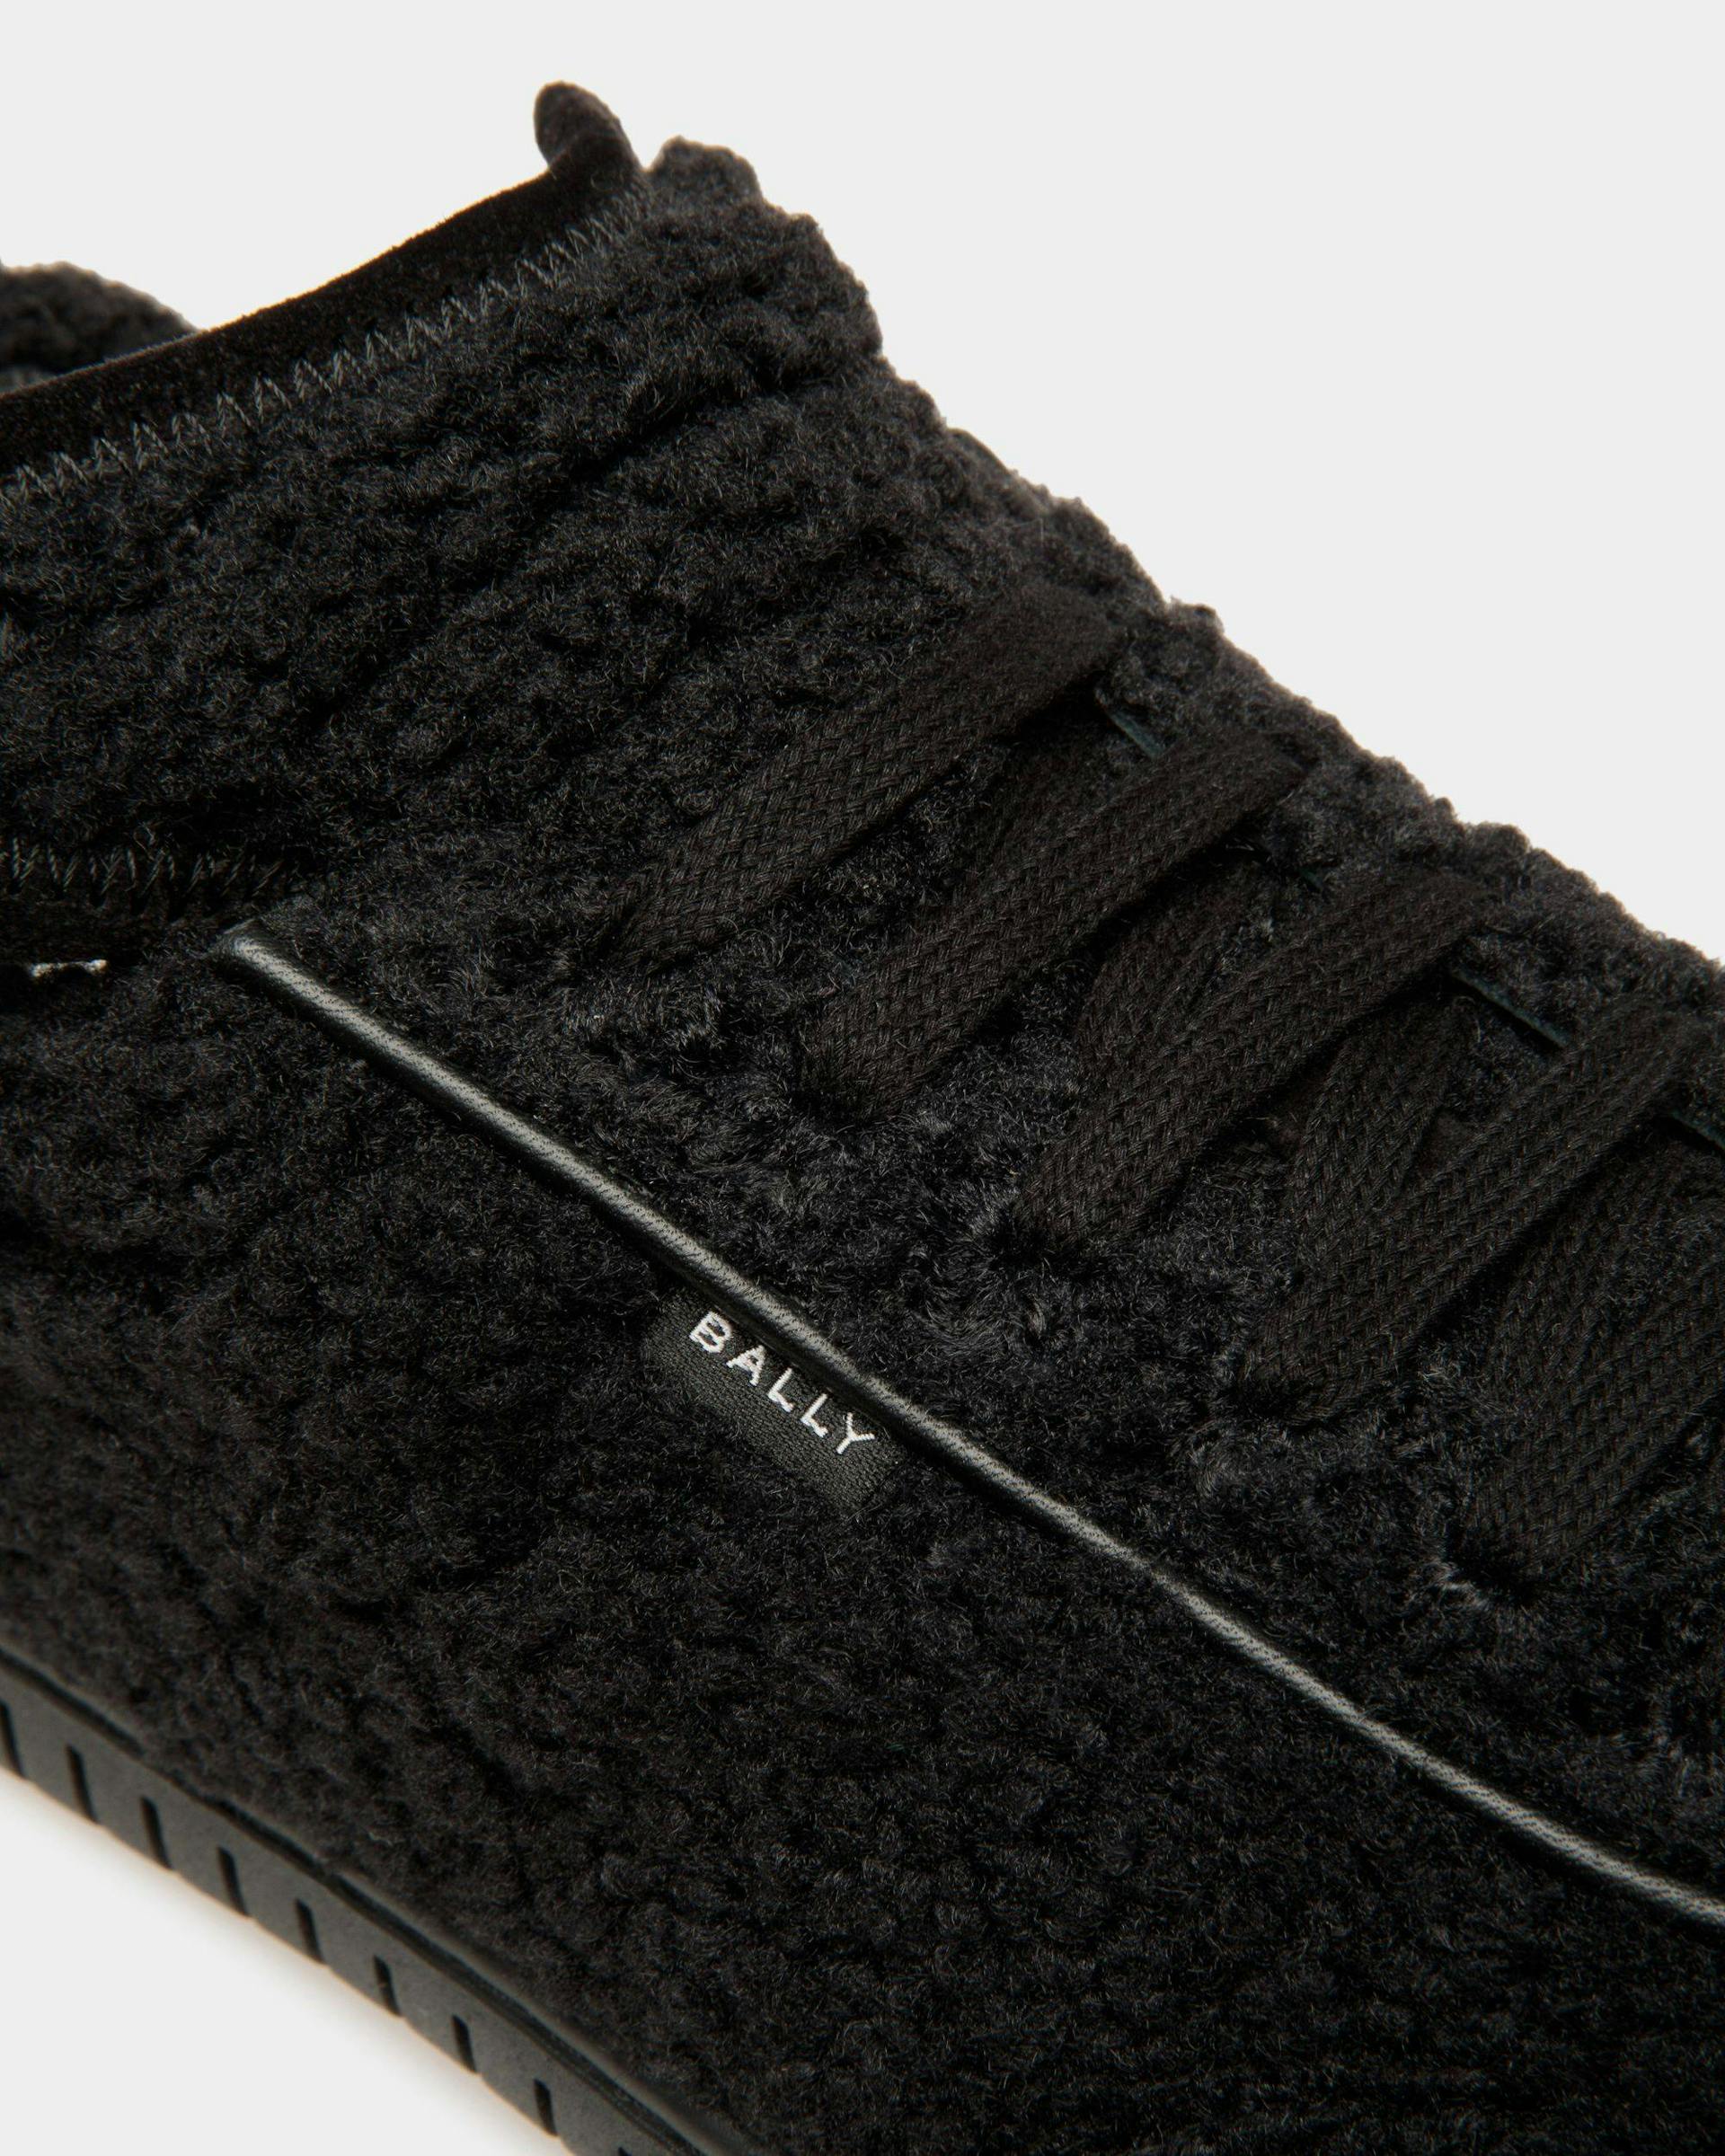 Player Sneakers In Black Synthetic Fur - Men's - Bally - 05